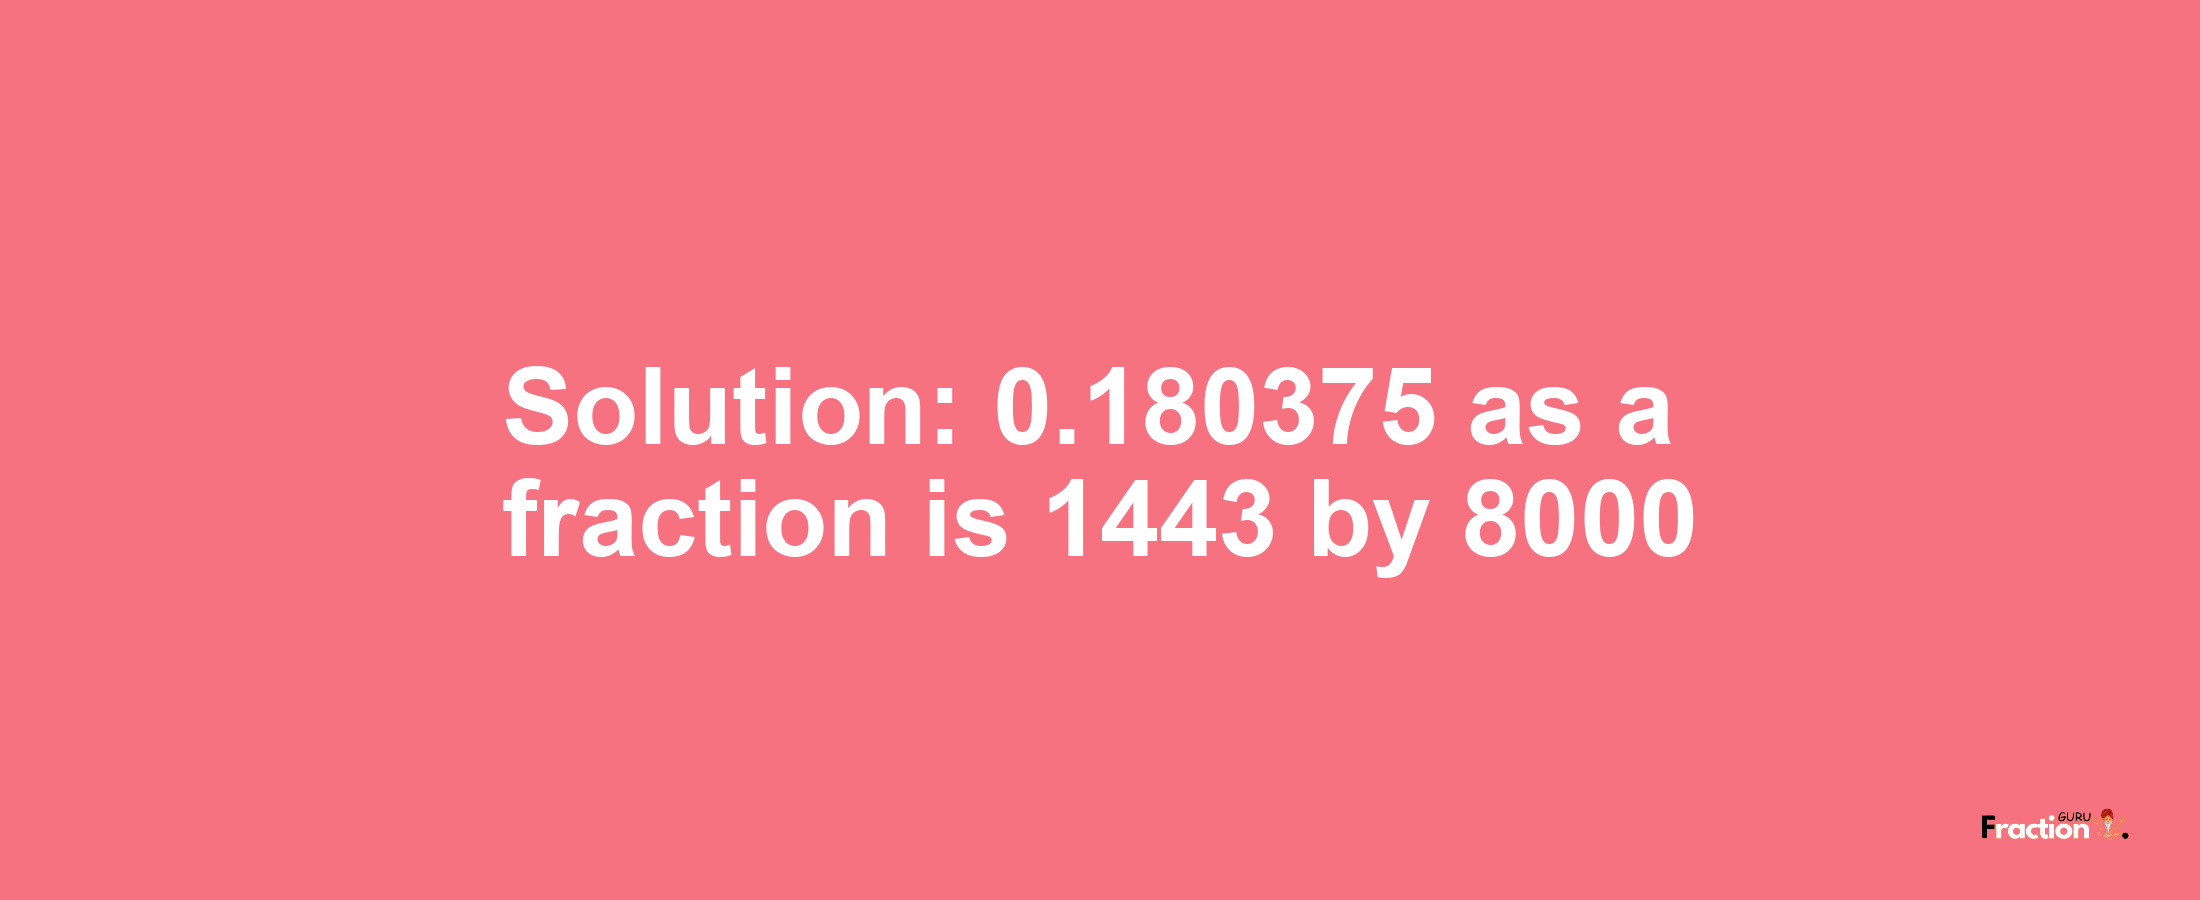 Solution:0.180375 as a fraction is 1443/8000